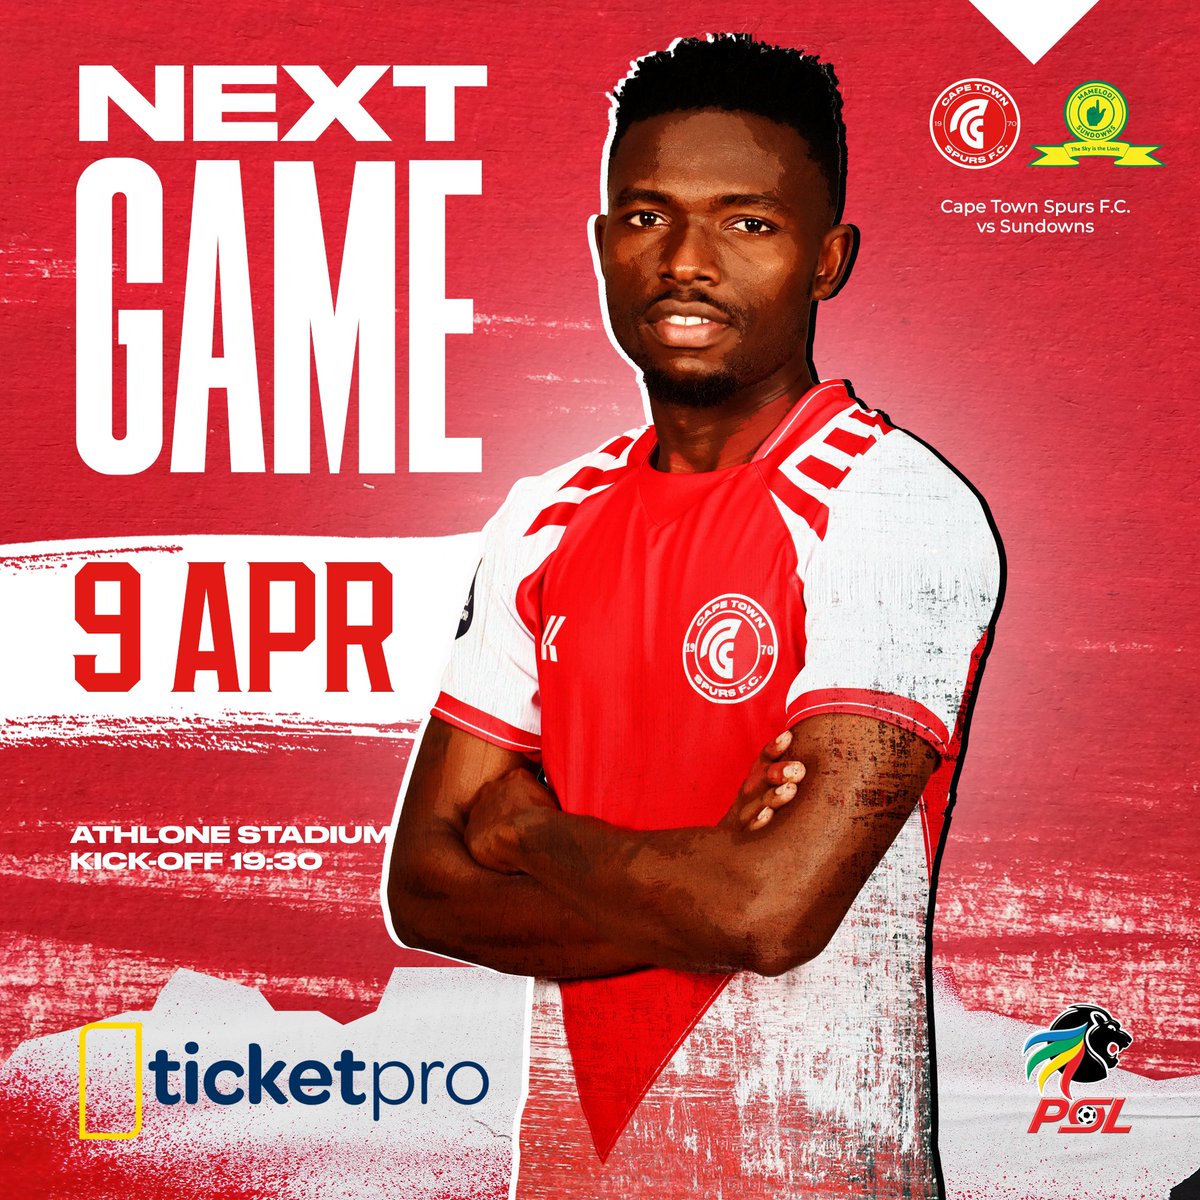 Cape Town Spurs vs Sundowns Athlone Stadium 🏟️ Tuesday, 9 April 2024 - 19:30🕒 Tickets available on Ticketpro 🎫 Link 🔗 ticketpros.co.za/portal/web/ind…